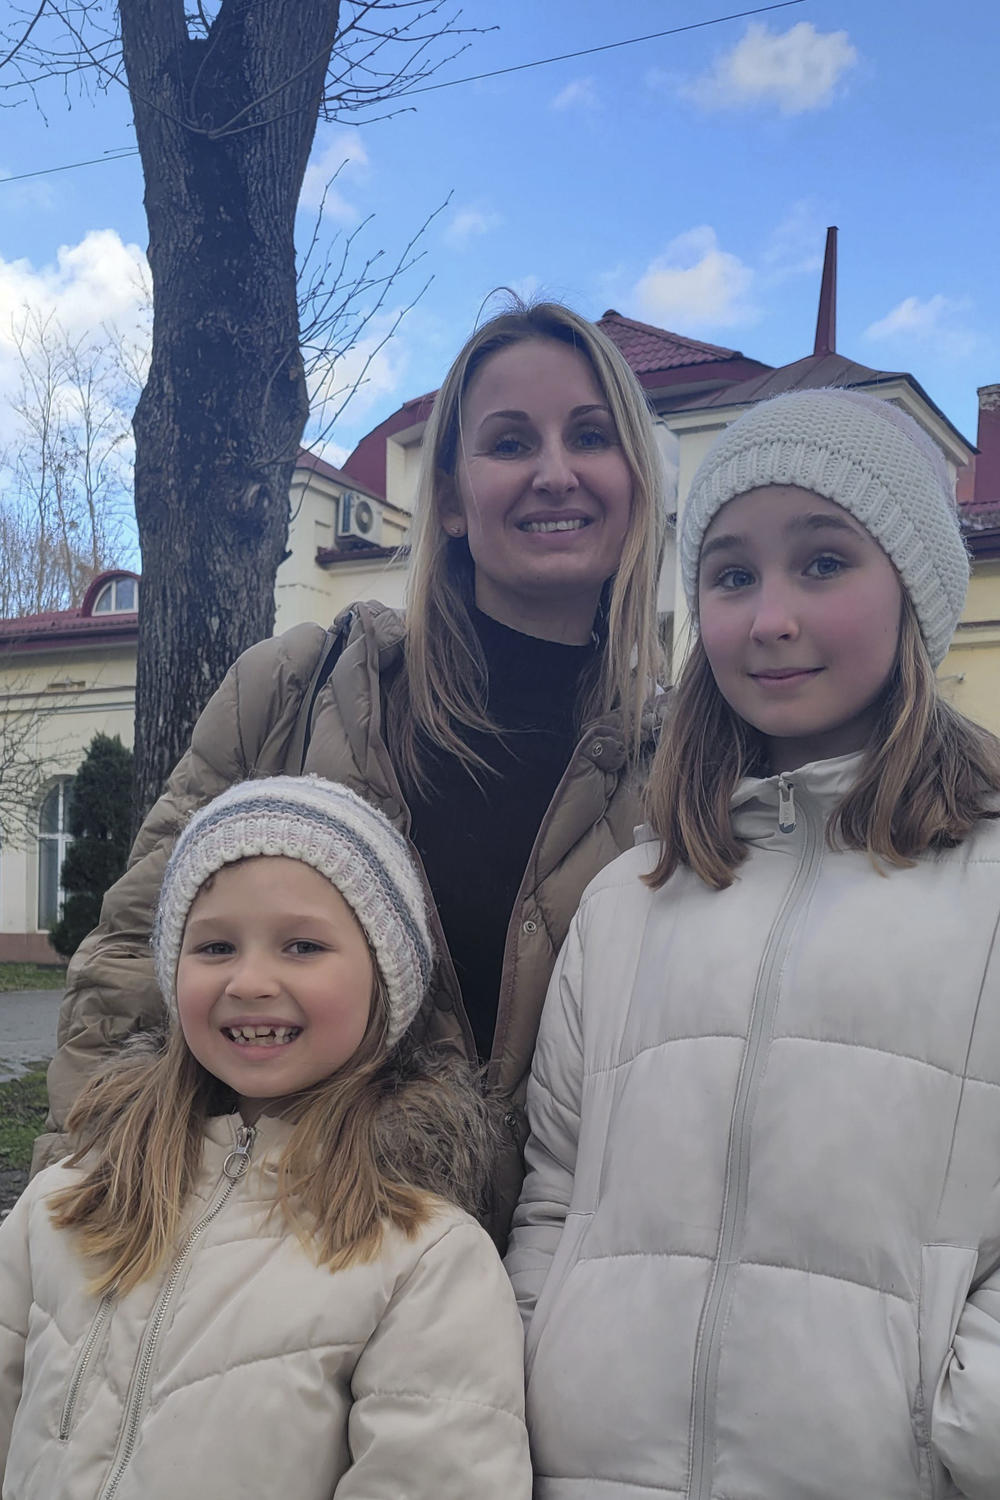 Kateryna Kltsova and her two daughters, 11-year-old Maria and 7-year-old Nadia, had to leave their hometown Kharkiv as Russian forces increased their attacks in eastern Ukraine.